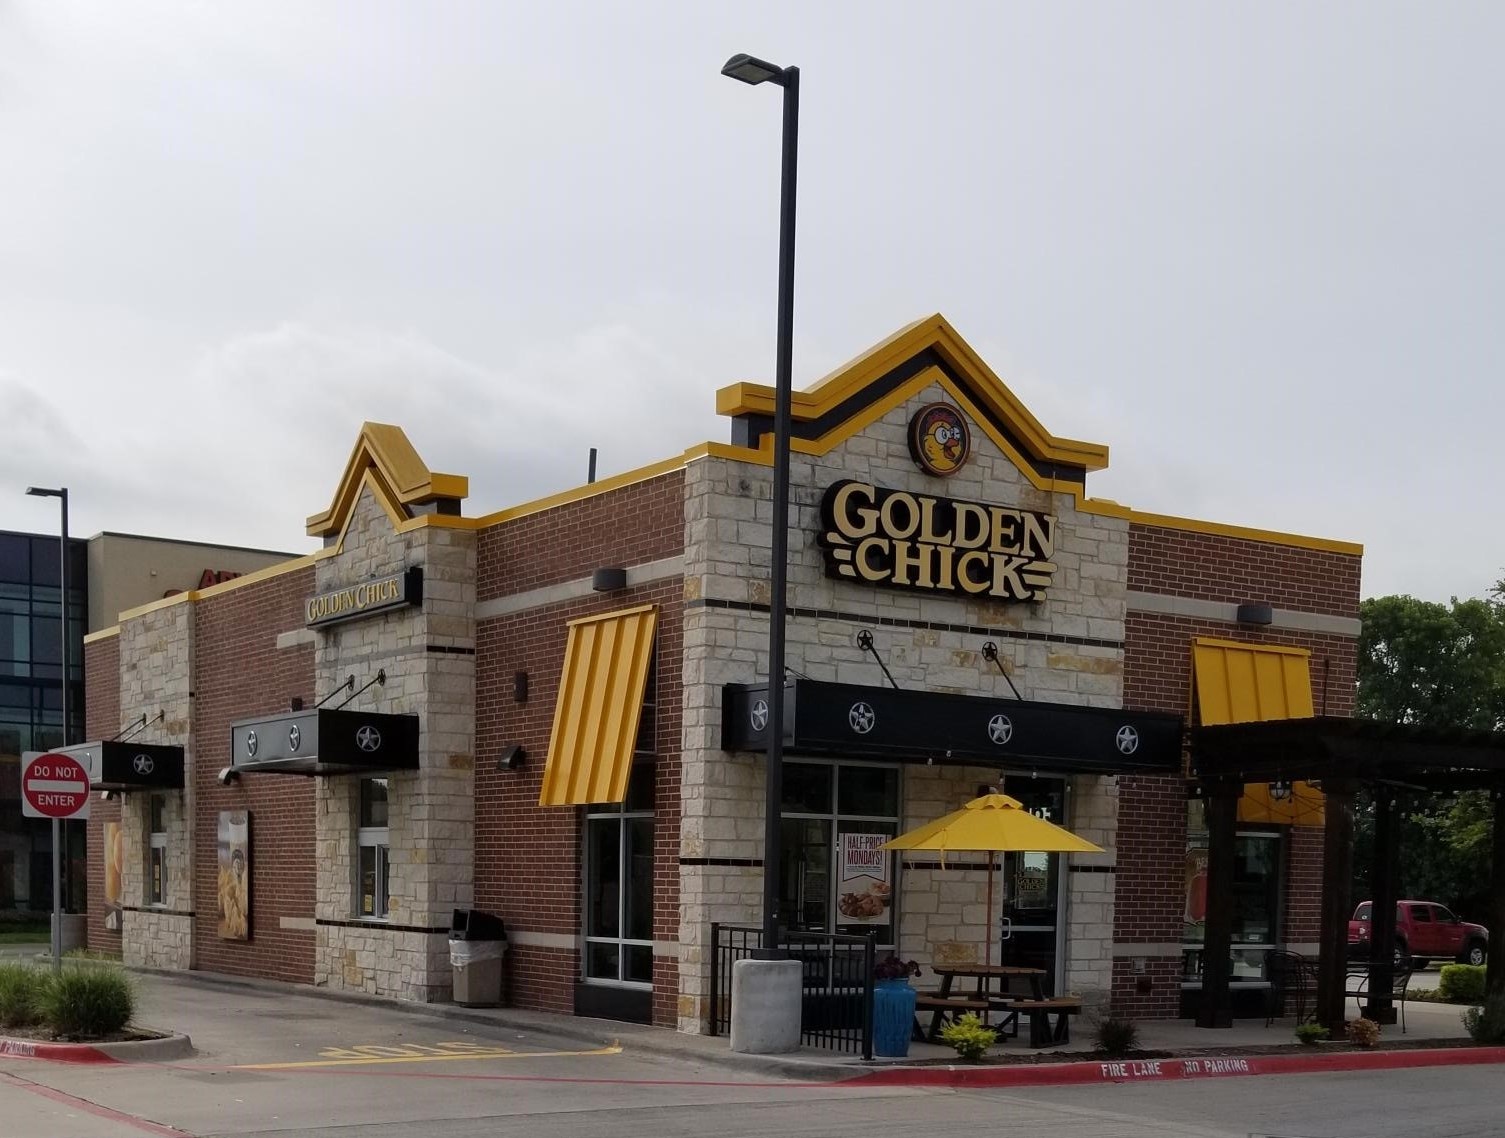 Golden Chick storefront.  Your local Golden Chick fast food restaurant in McKinney, Texas